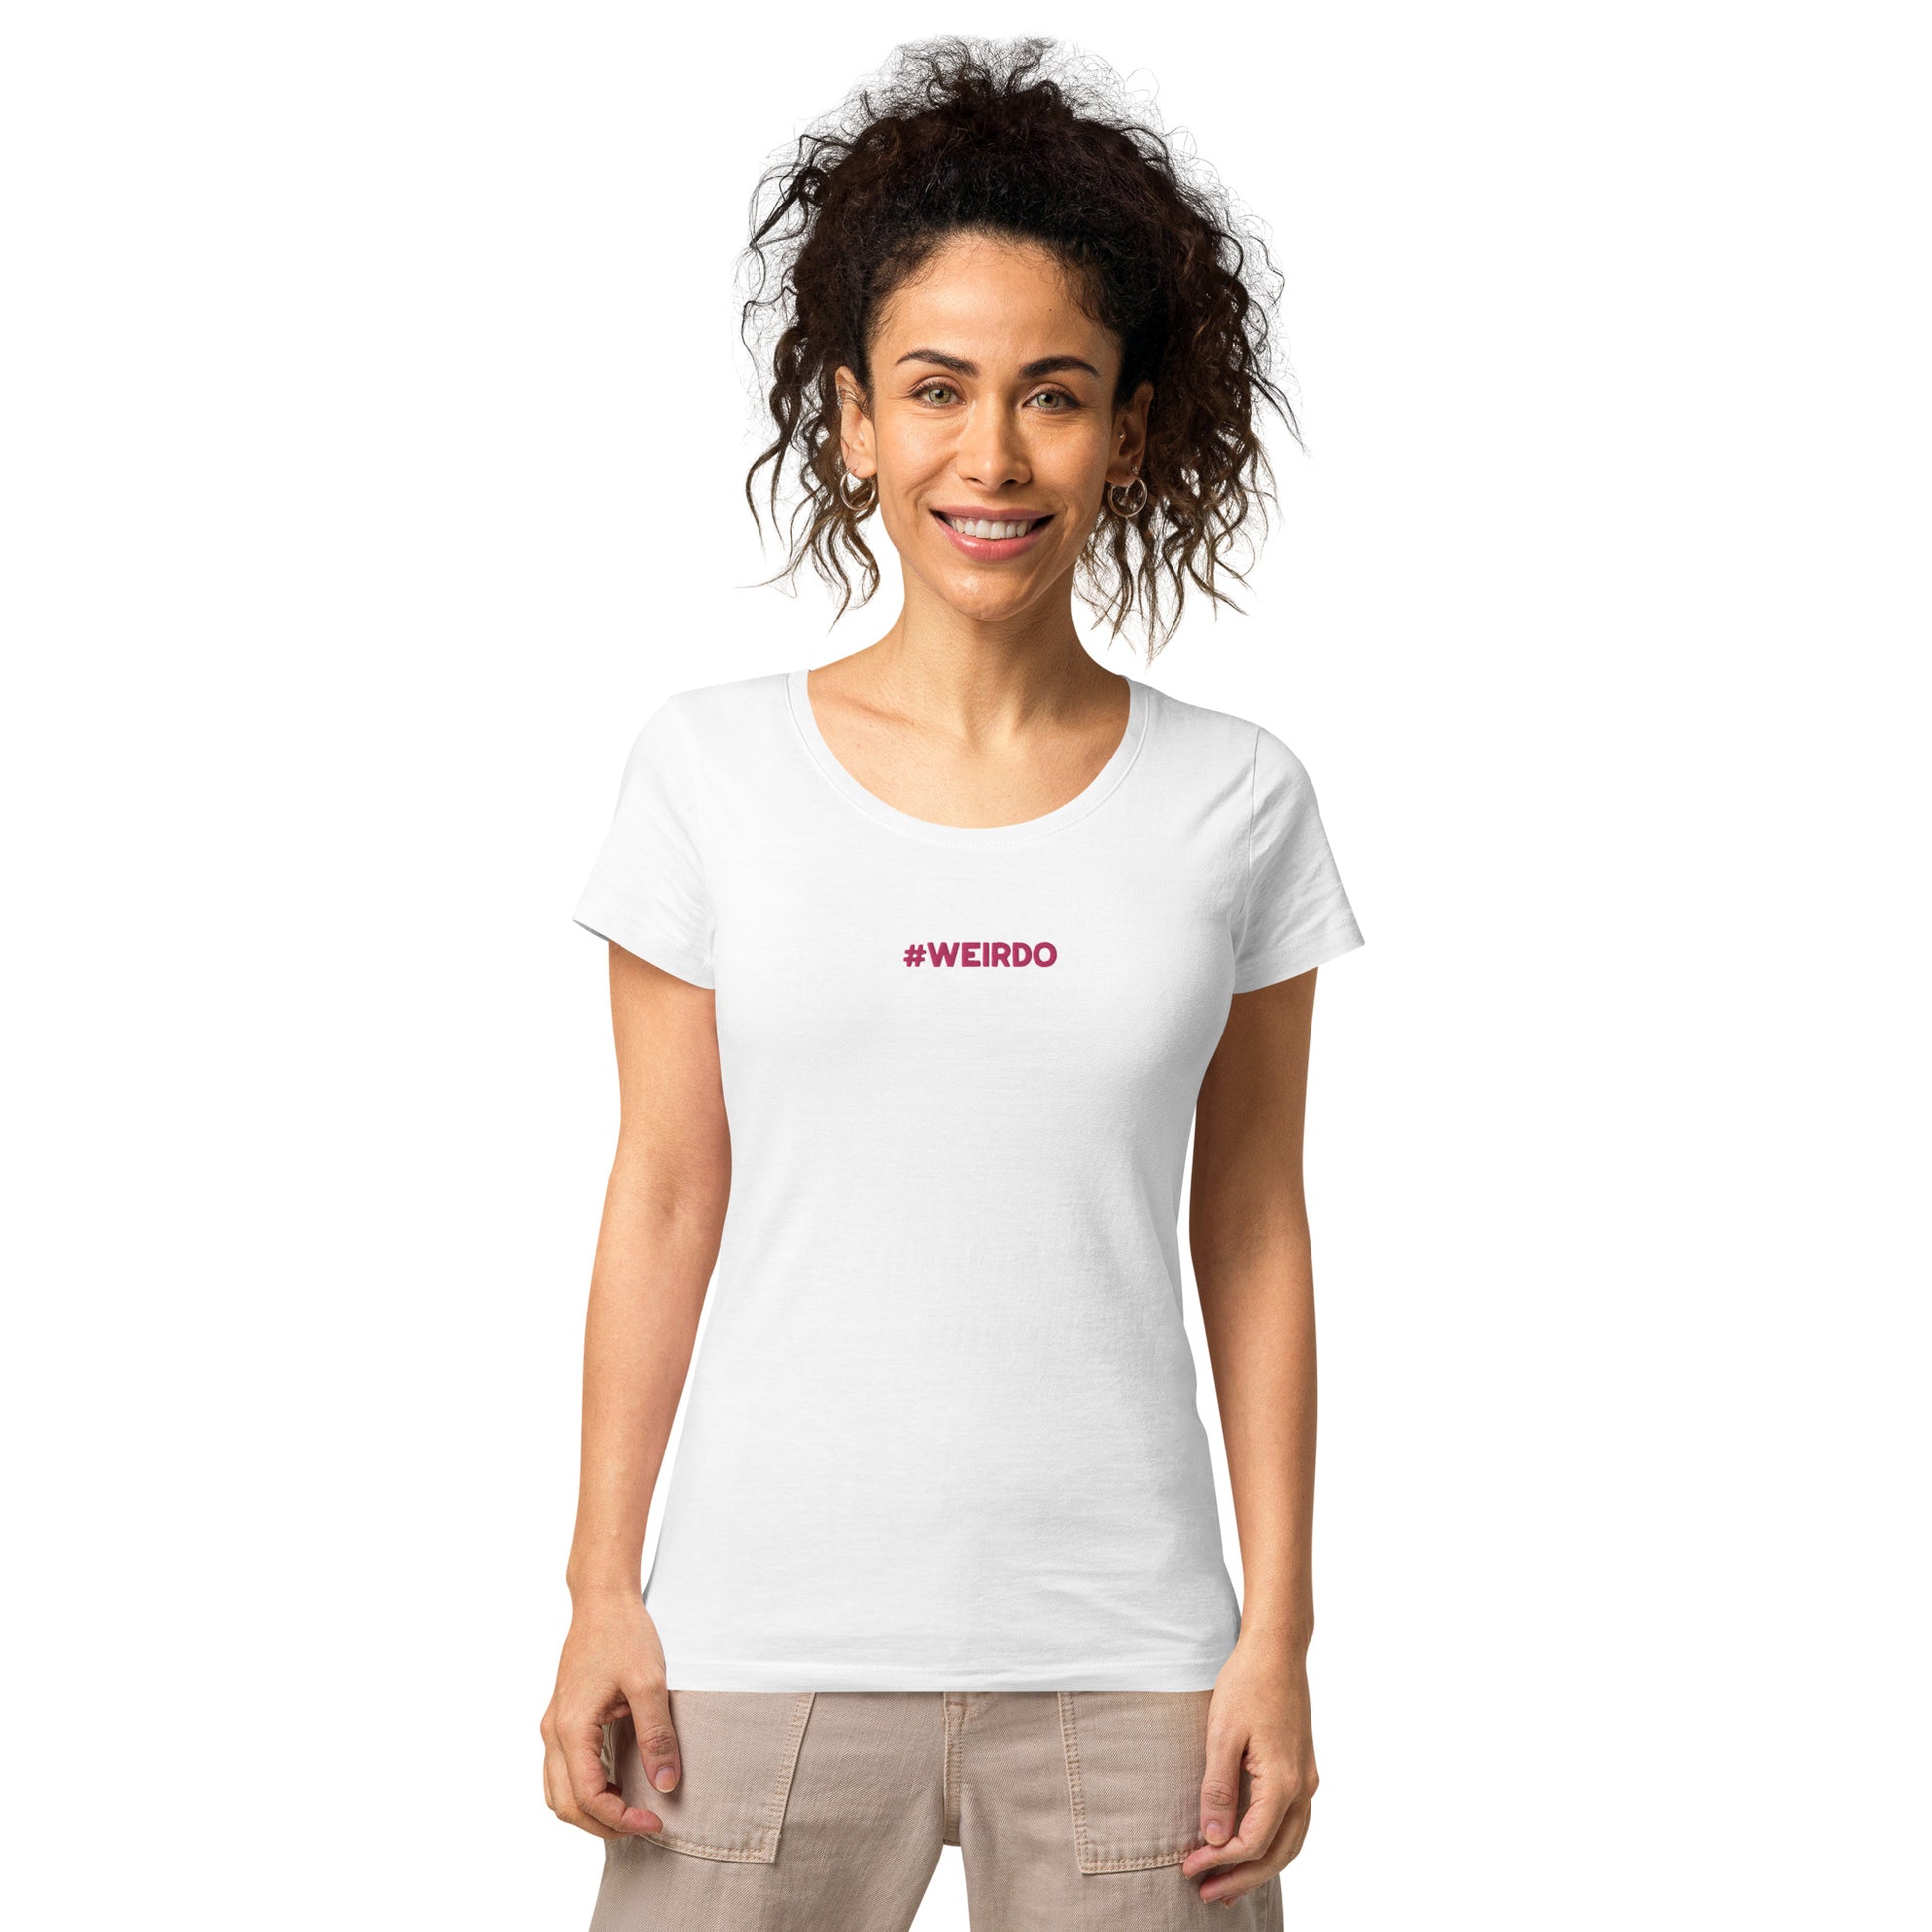 #WEIRDO memes are embroidered on our t-shirts for weird people! This is a white cotton t-shirt for women with a pink embroidery at the front of the t shirt. Check out all our funny t shirts for woman in the number one funny t shirt company in the world!